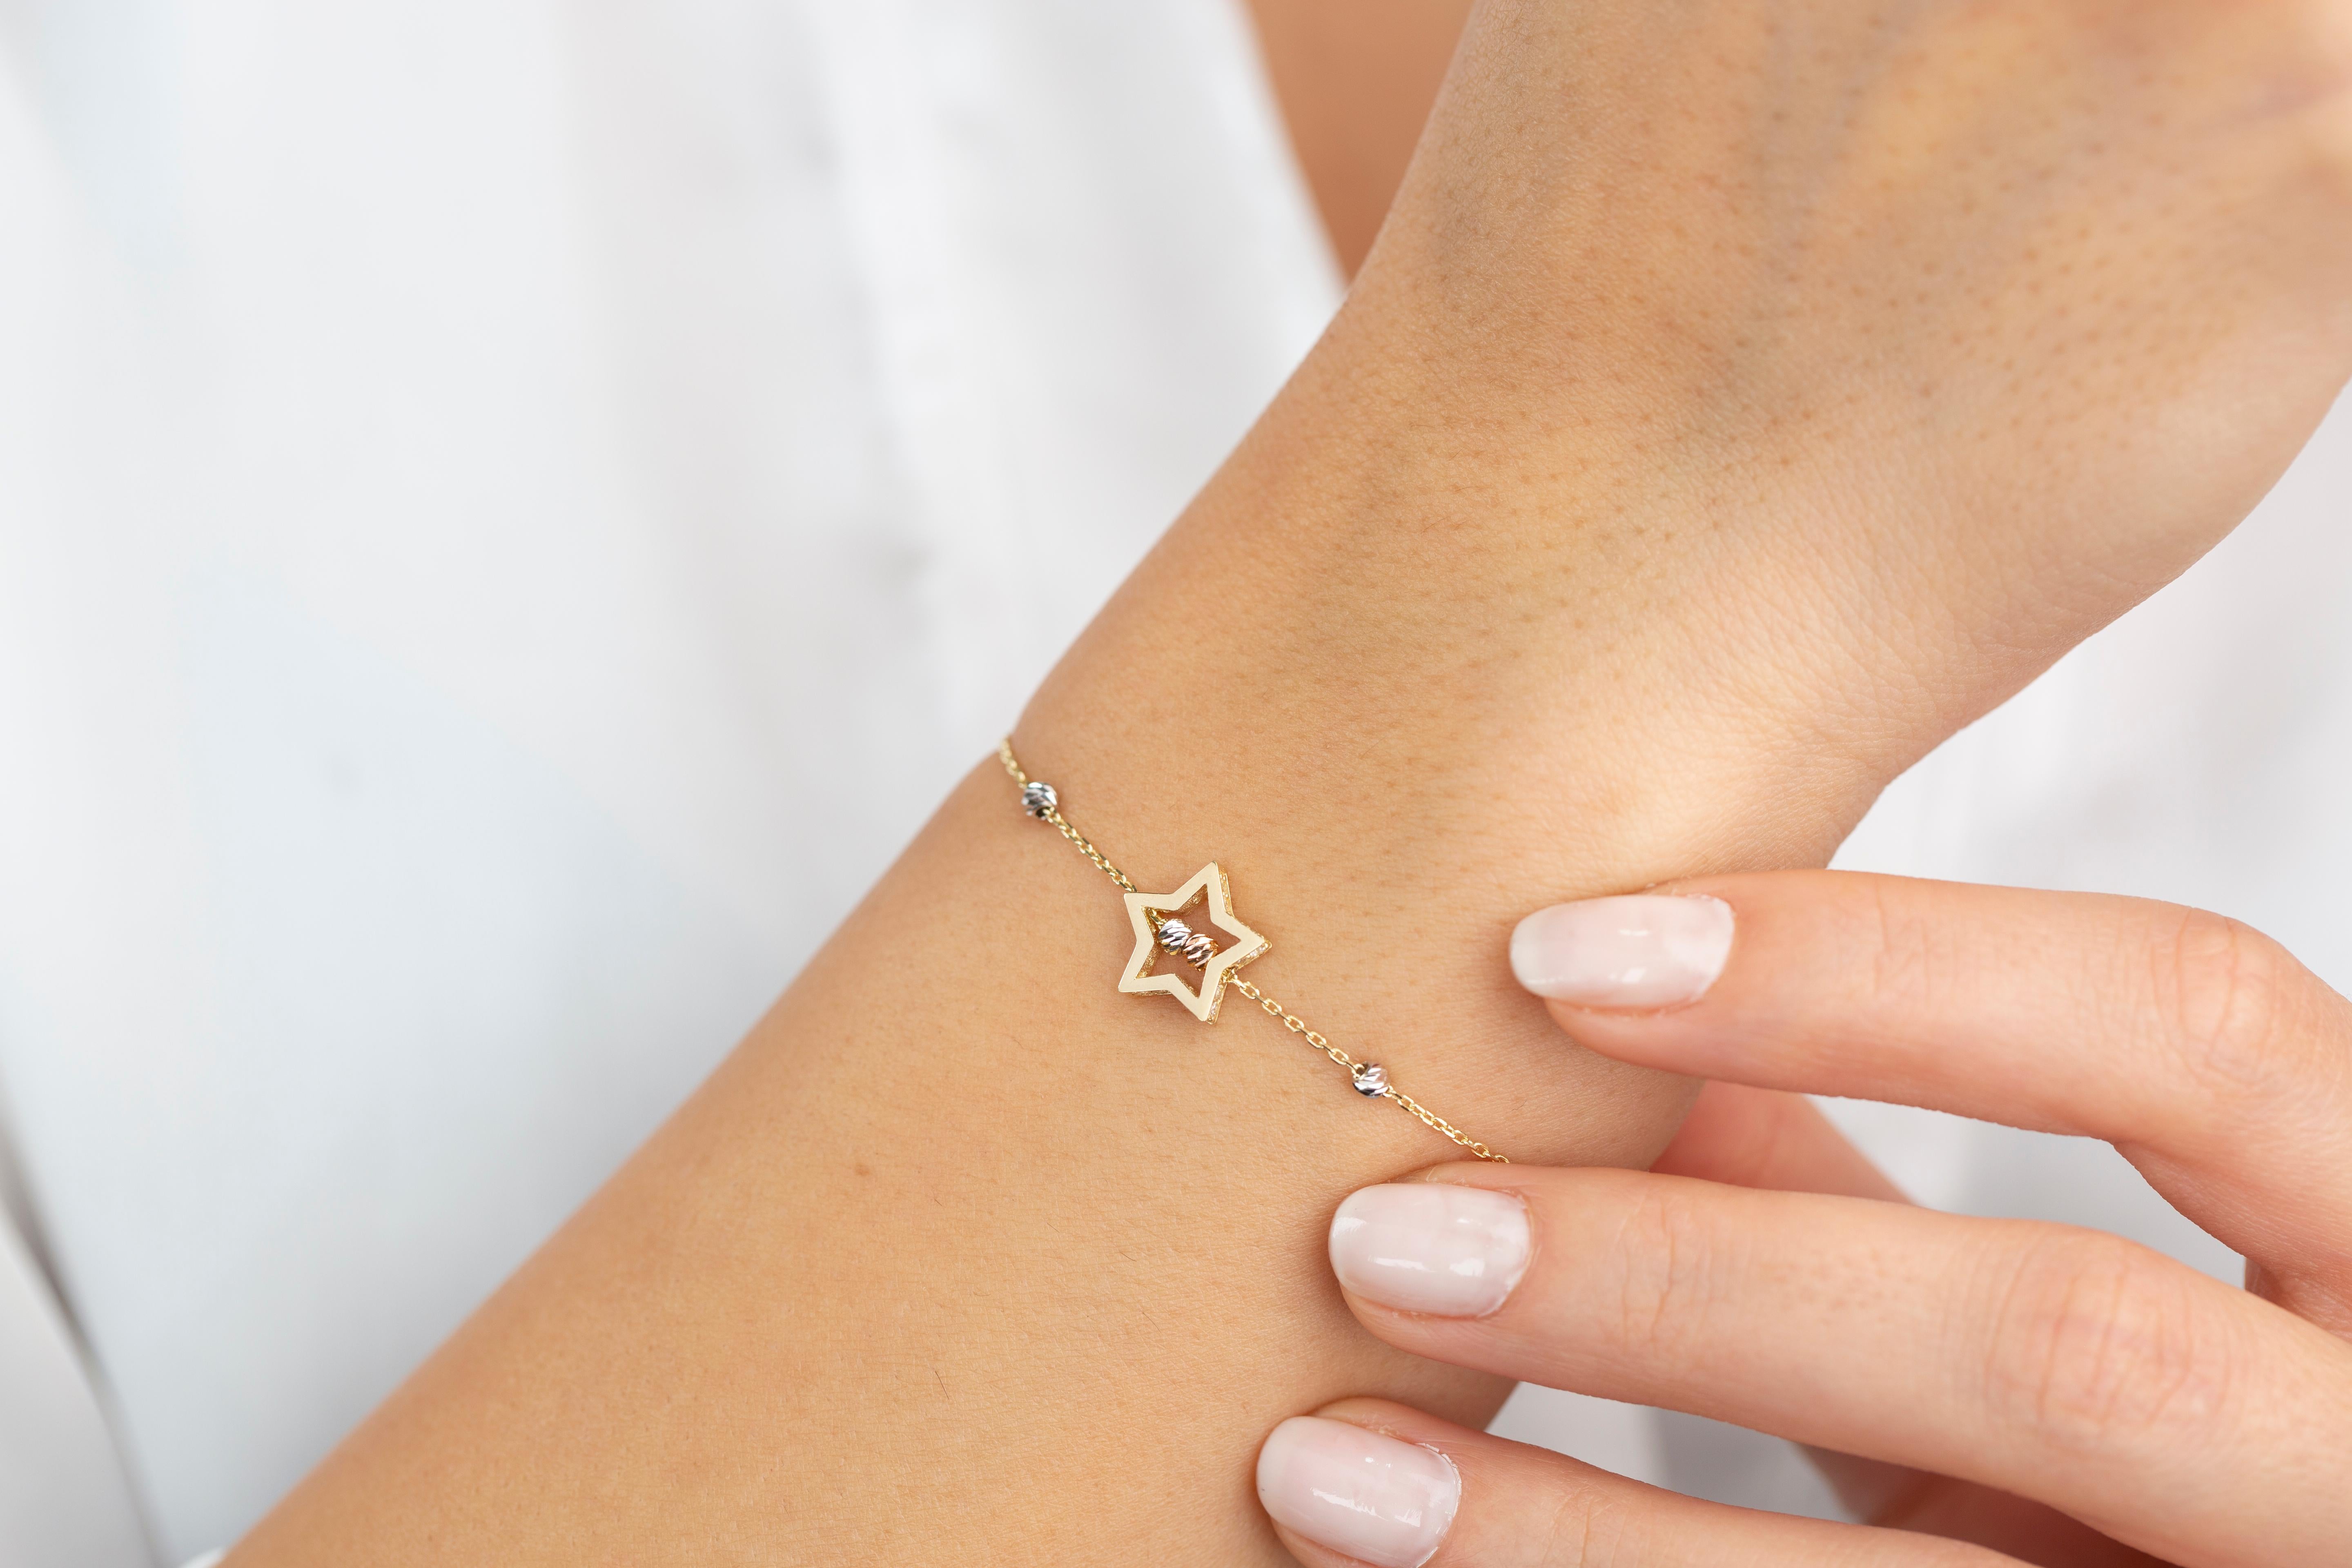 14K Gold Star Shape Dainty Bracelet
Made of 14 ct. solid gold.
With hallmark.

Total Weight: 1,48 gr.
Size: 18.00 cm

This piece was made with quality materials and excellent handwork. I guarantee the quality assurance of my handwork and materials.